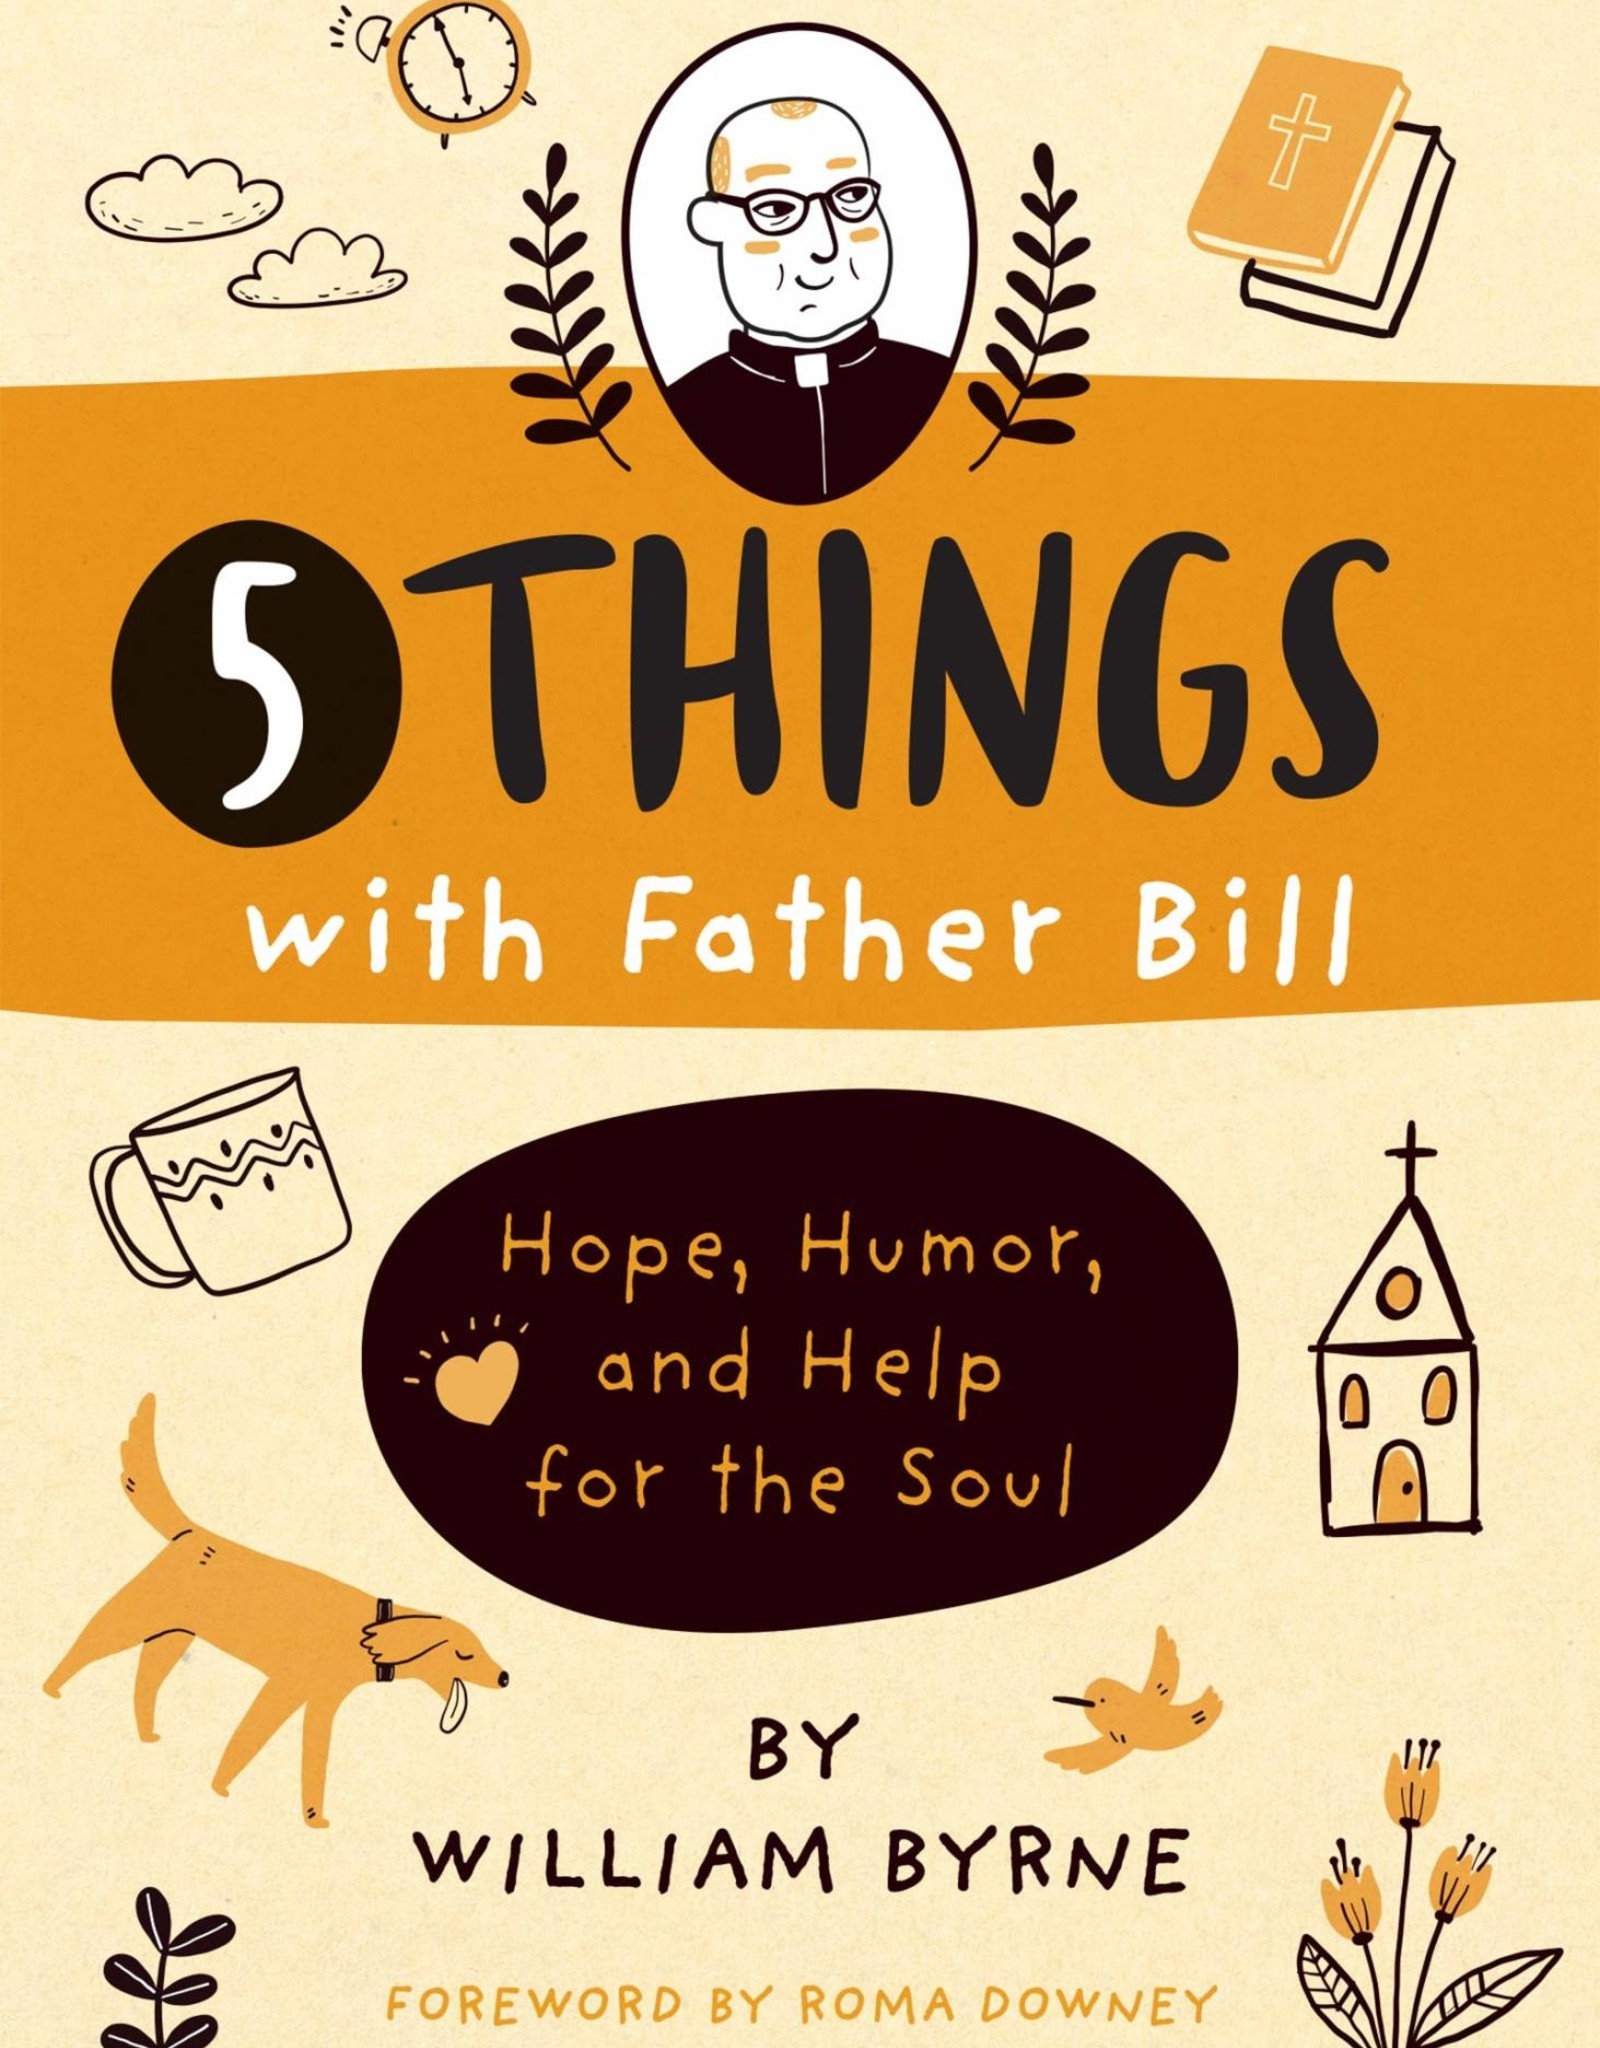 5 Things with Father Bill: Hope, Humor, and Help for the Soul